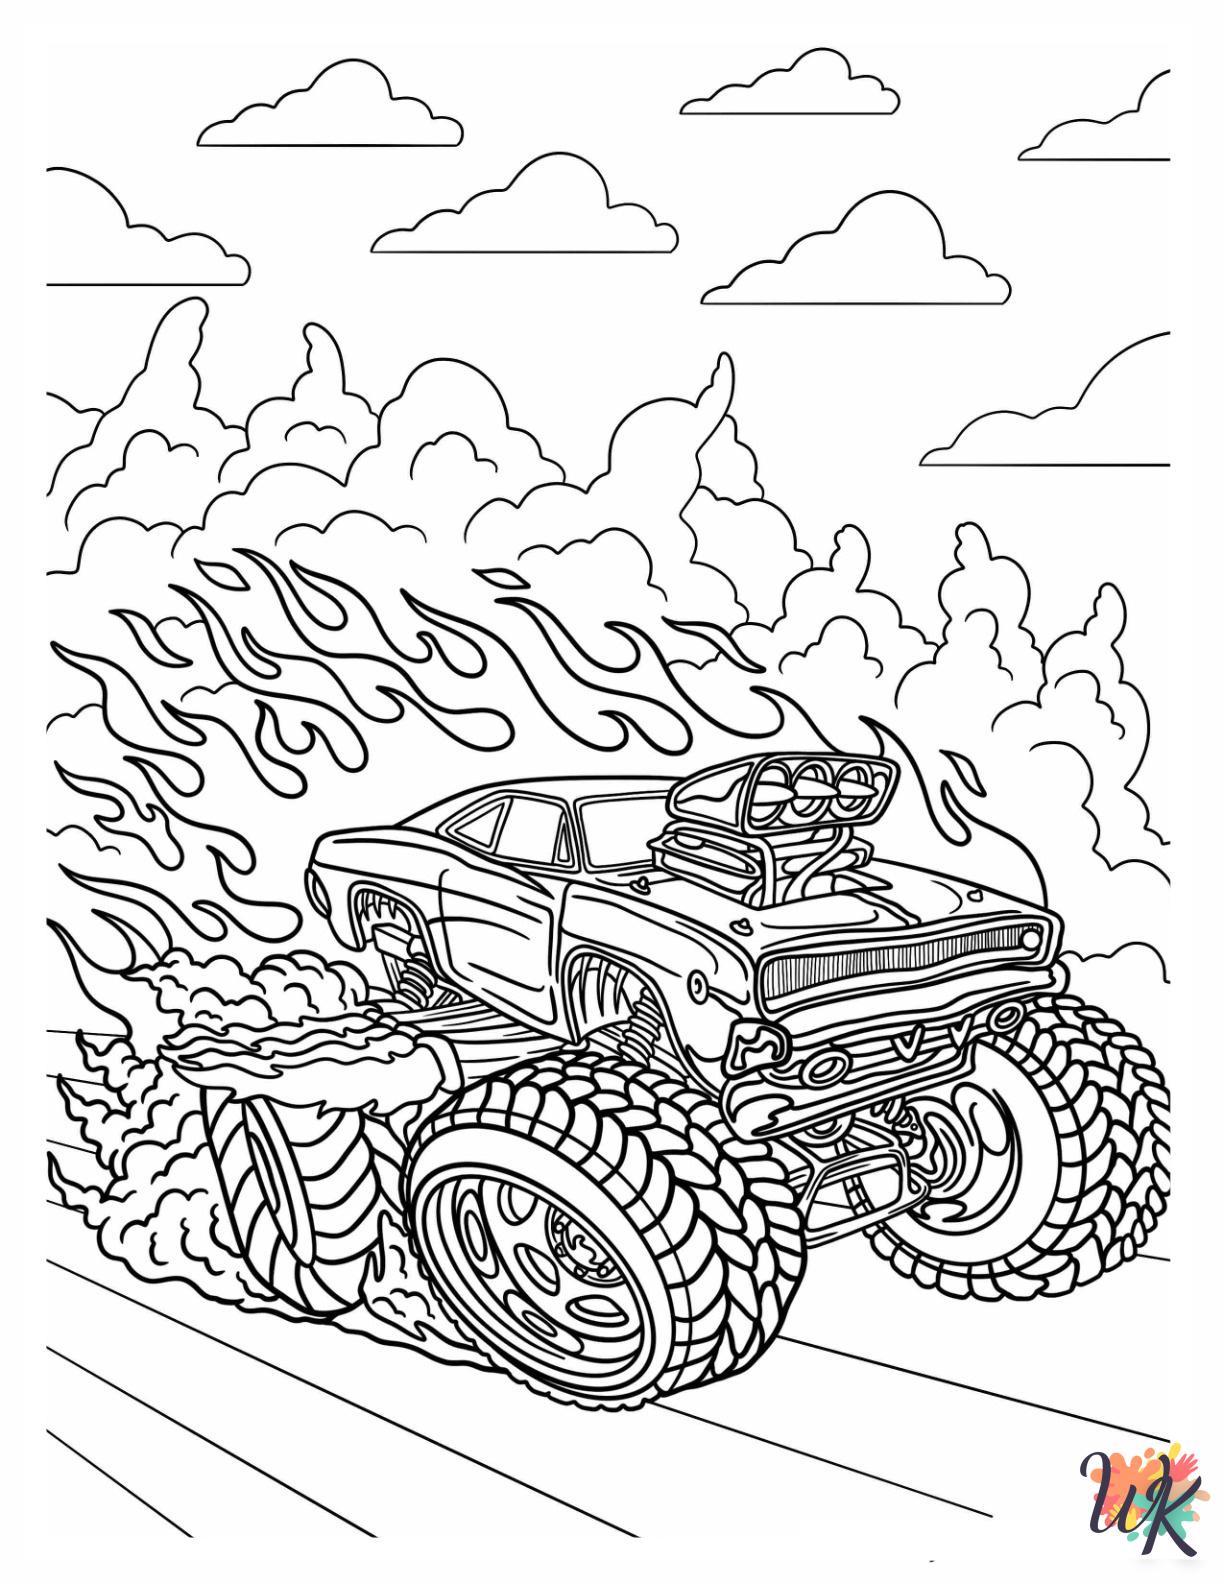 Hot Wheels coloring pages for adults pdf